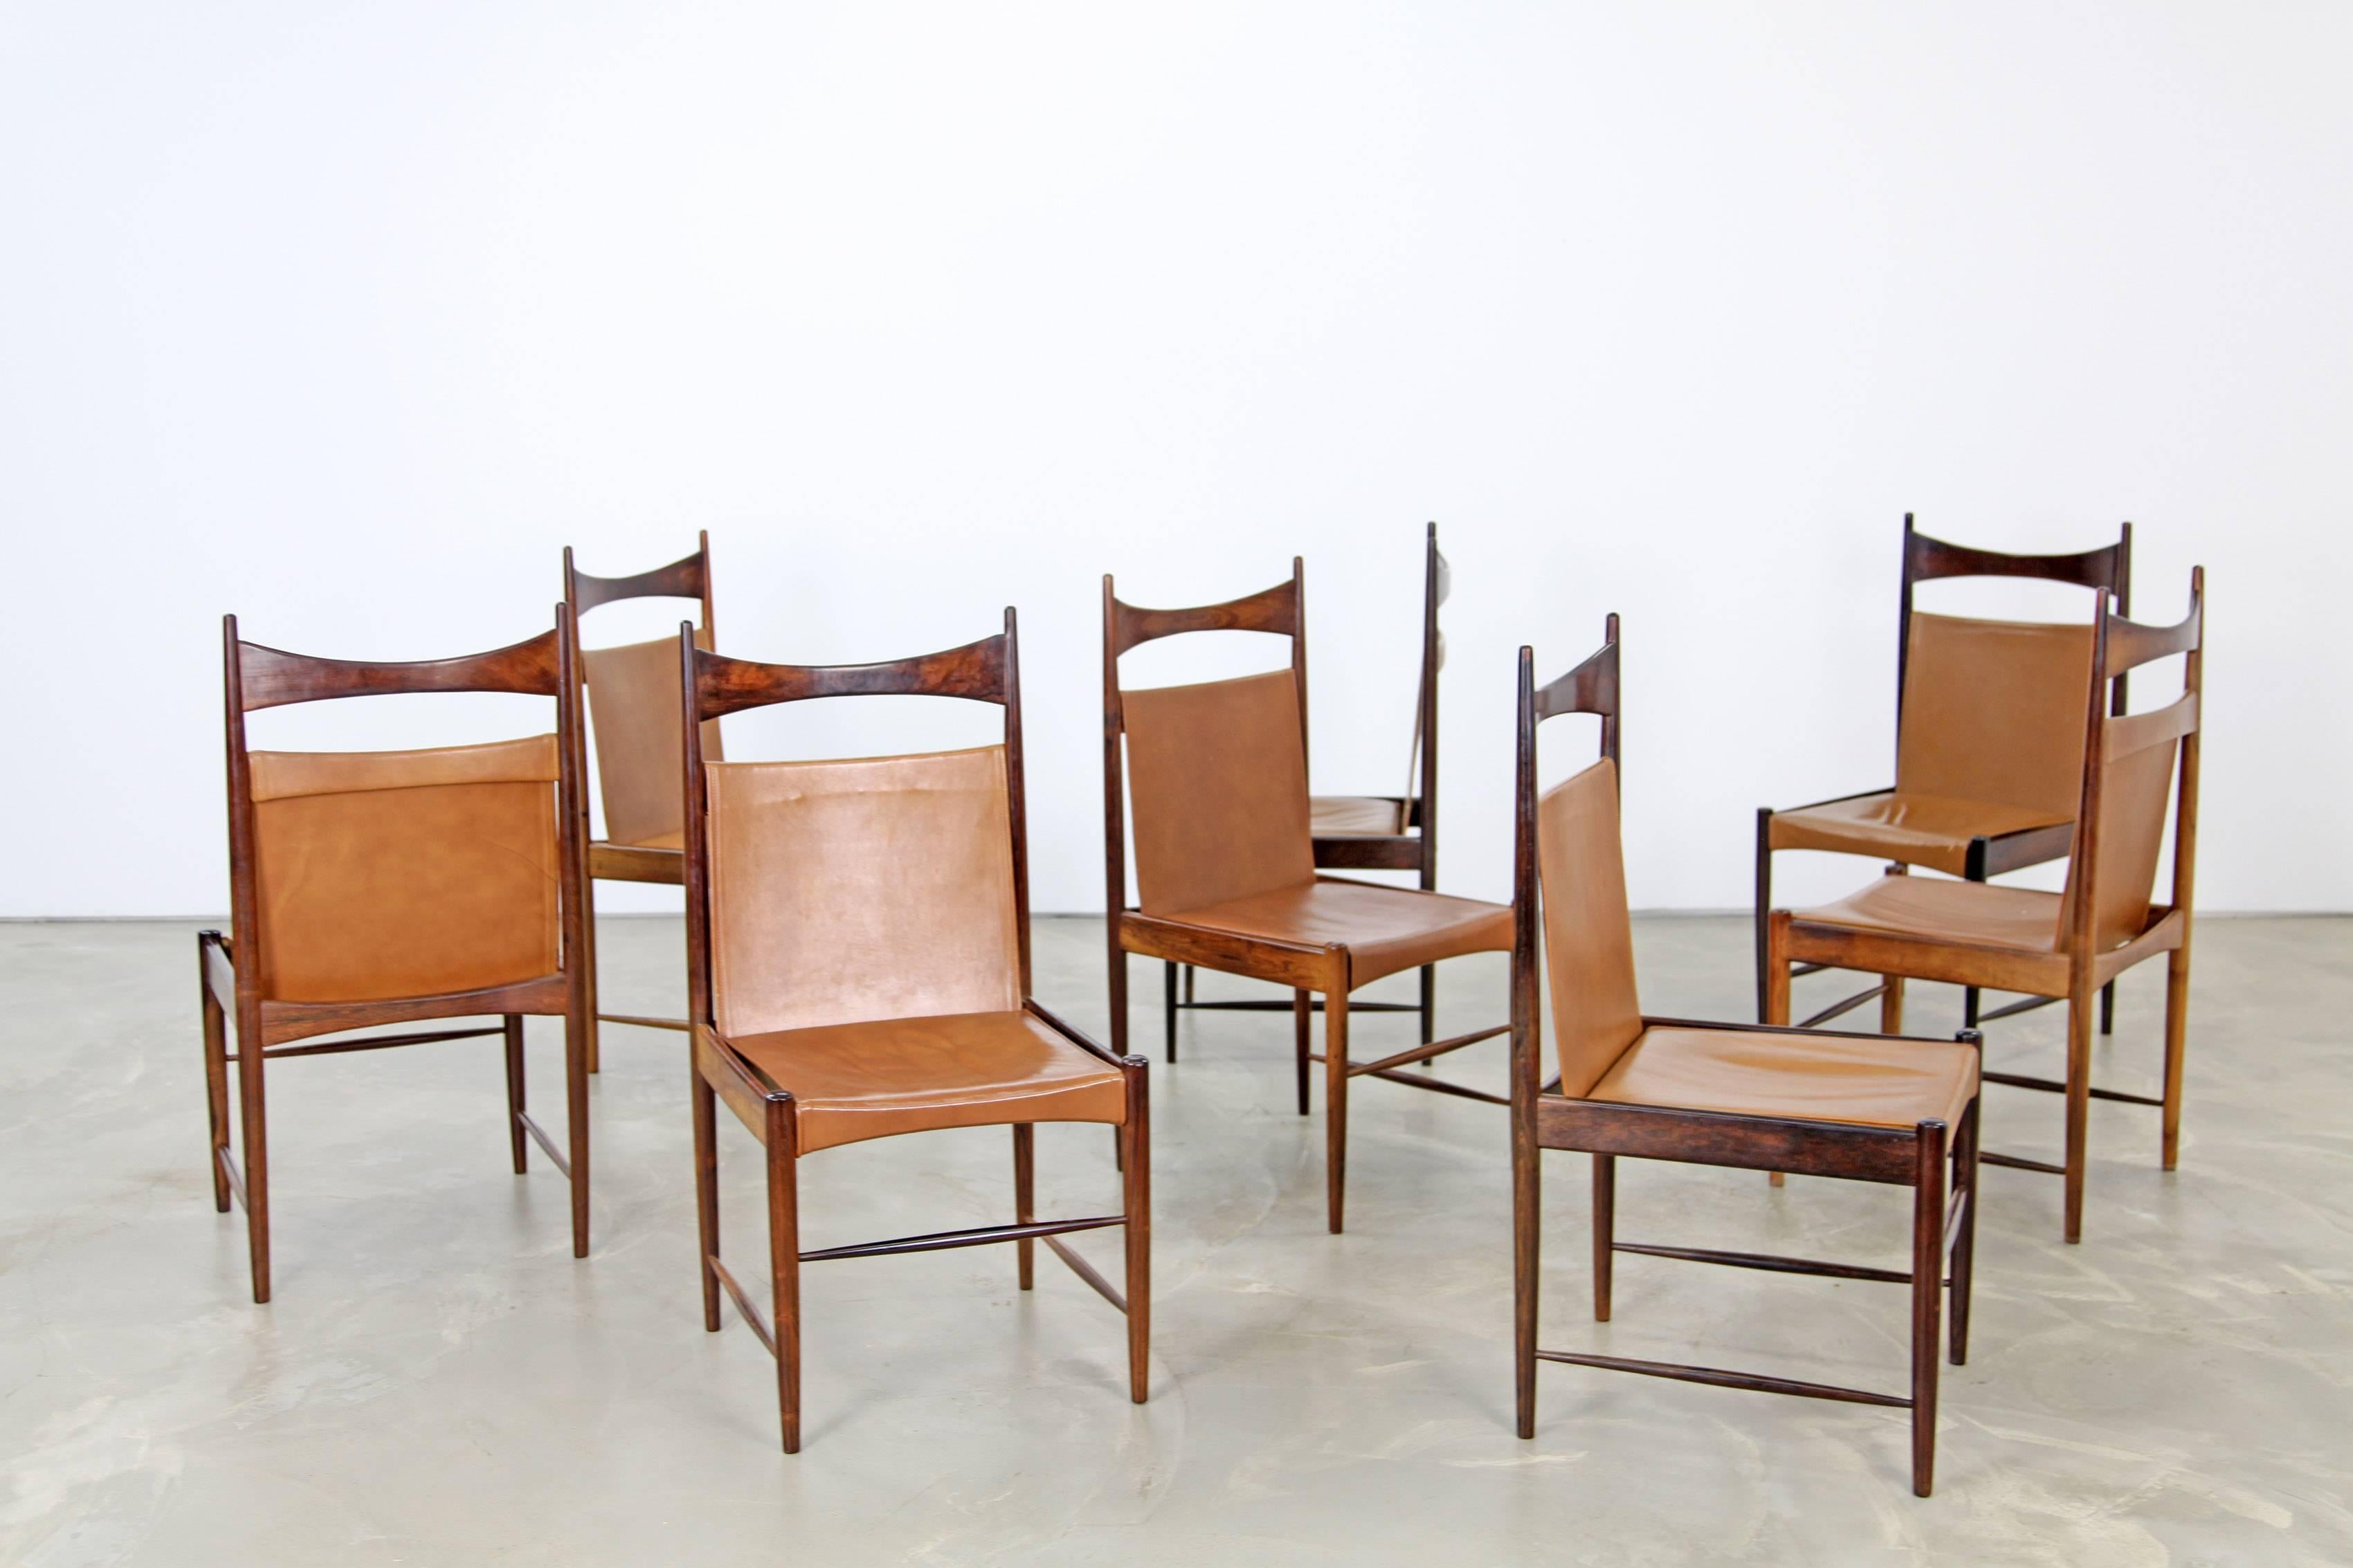 Set of eight dining chairs from Brazil by Sergio Rodrigues. The chairs are in beautiful condition.